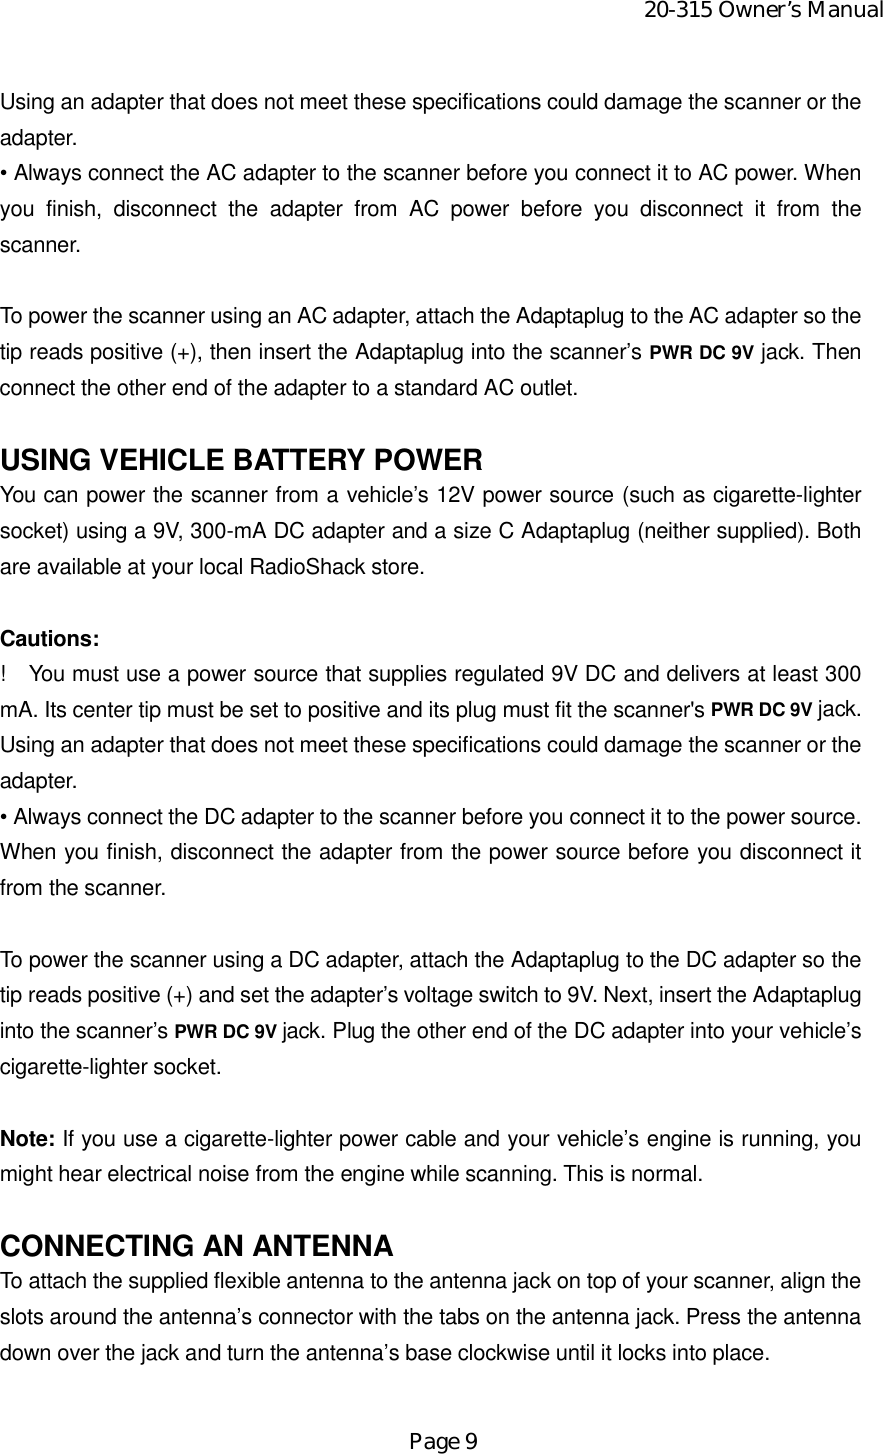 20-315 Owner’s ManualPage 9Using an adapter that does not meet these specifications could damage the scanner or theadapter.• Always connect the AC adapter to the scanner before you connect it to AC power. Whenyou finish, disconnect the adapter from AC power before you disconnect it from thescanner.To power the scanner using an AC adapter, attach the Adaptaplug to the AC adapter so thetip reads positive (+), then insert the Adaptaplug into the scanner’s PWR DC 9V jack. Thenconnect the other end of the adapter to a standard AC outlet.USING VEHICLE BATTERY POWERYou can power the scanner from a vehicle’s 12V power source (such as cigarette-lightersocket) using a 9V, 300-mA DC adapter and a size C Adaptaplug (neither supplied). Bothare available at your local RadioShack store.Cautions:!    You must use a power source that supplies regulated 9V DC and delivers at least 300mA. Its center tip must be set to positive and its plug must fit the scanner&apos;s PWR DC 9V jack.Using an adapter that does not meet these specifications could damage the scanner or theadapter.• Always connect the DC adapter to the scanner before you connect it to the power source.When you finish, disconnect the adapter from the power source before you disconnect itfrom the scanner.To power the scanner using a DC adapter, attach the Adaptaplug to the DC adapter so thetip reads positive (+) and set the adapter’s voltage switch to 9V. Next, insert the Adaptapluginto the scanner’s PWR DC 9V jack. Plug the other end of the DC adapter into your vehicle’scigarette-lighter socket.Note: If you use a cigarette-lighter power cable and your vehicle’s engine is running, youmight hear electrical noise from the engine while scanning. This is normal.CONNECTING AN ANTENNATo attach the supplied flexible antenna to the antenna jack on top of your scanner, align theslots around the antenna’s connector with the tabs on the antenna jack. Press the antennadown over the jack and turn the antenna’s base clockwise until it locks into place.